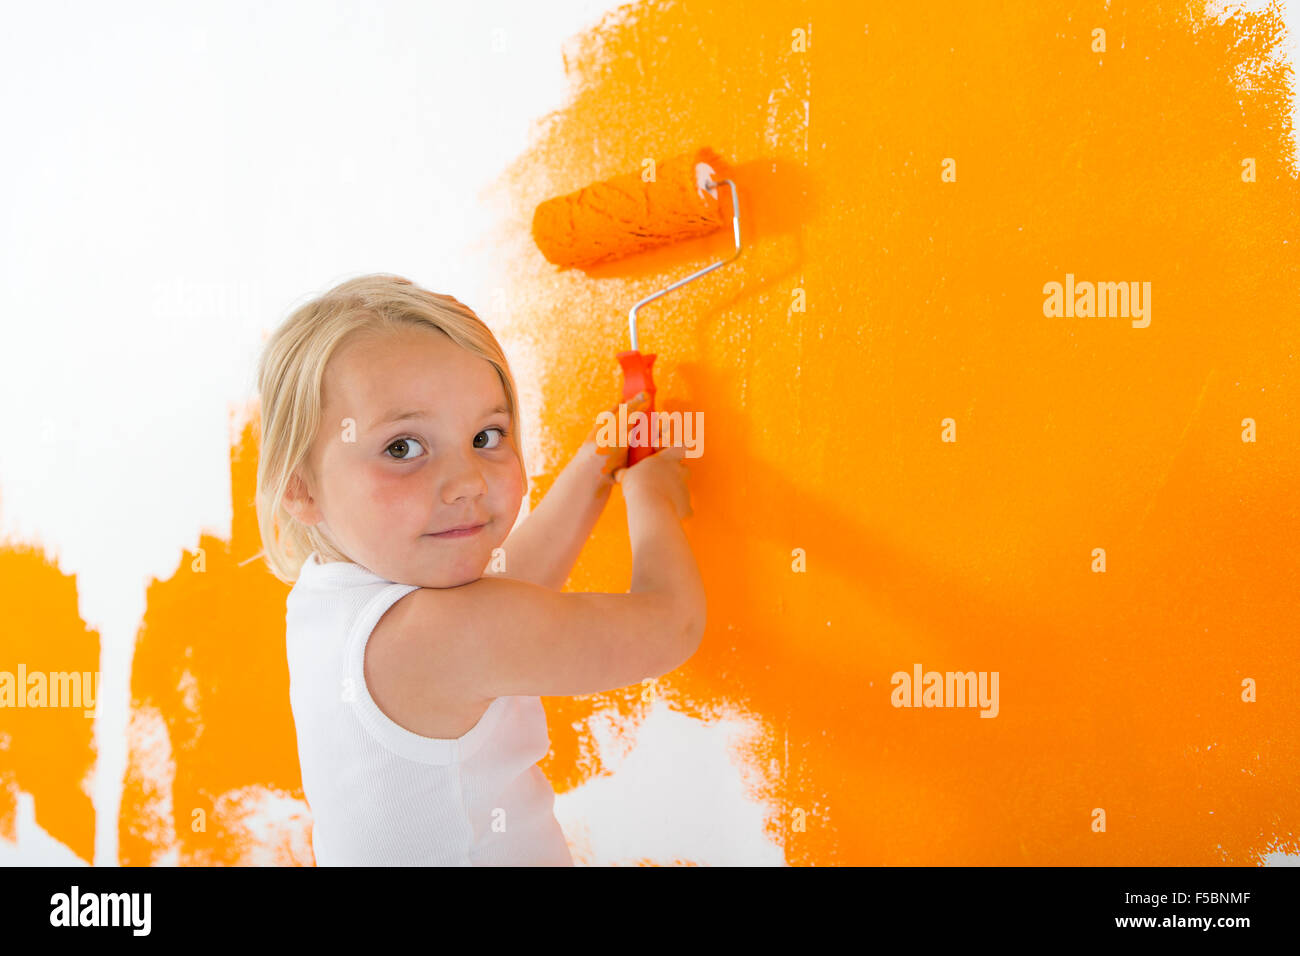 Little girl painting white wall with orange color Stock Photo